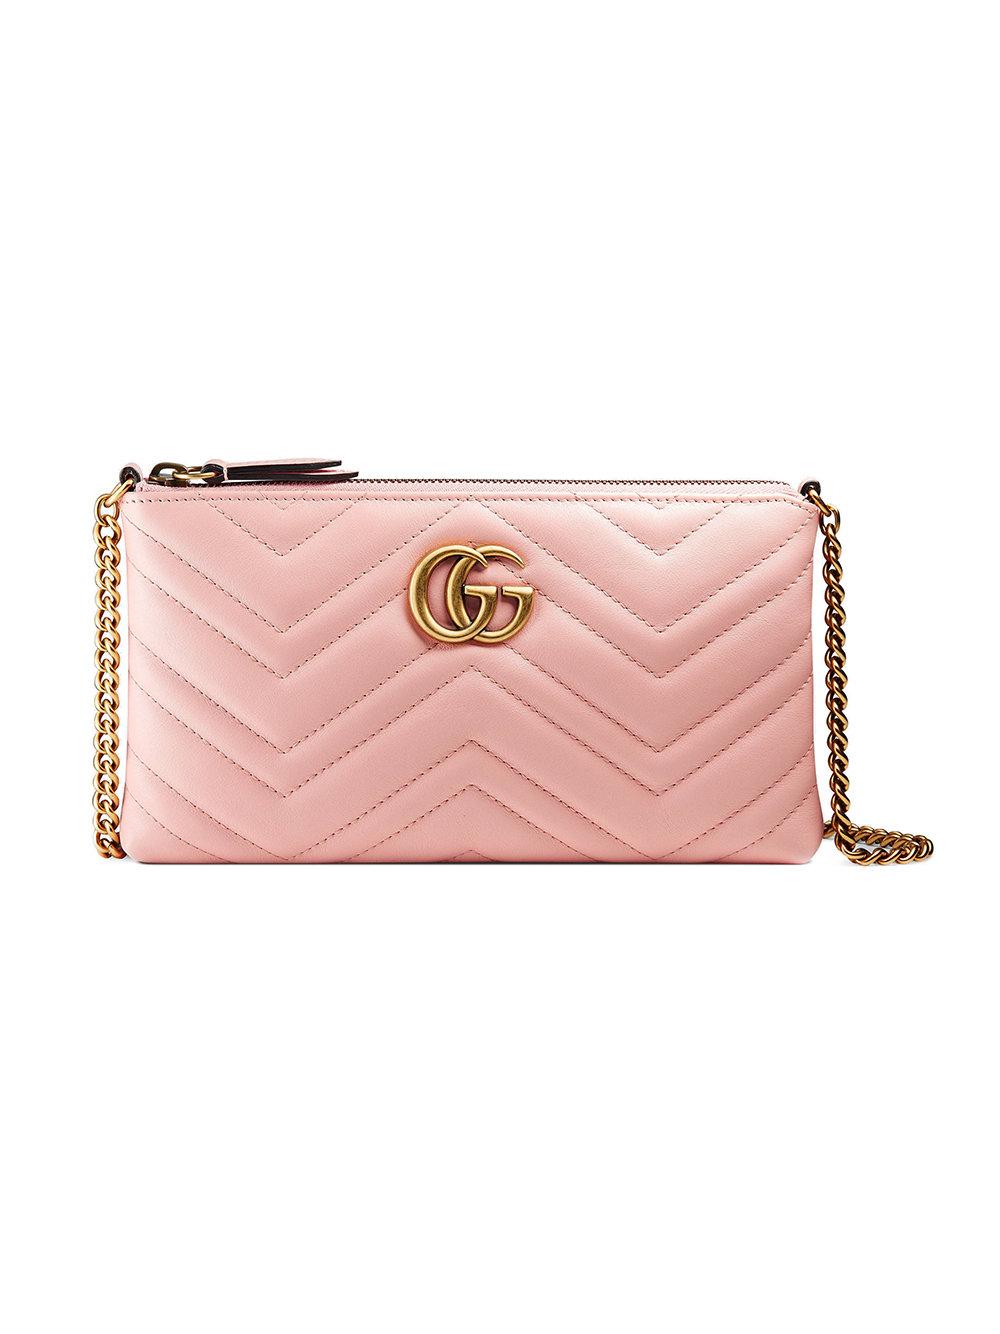 Lyst - Gucci Gg Marmont Mini Chain Bag in Pink